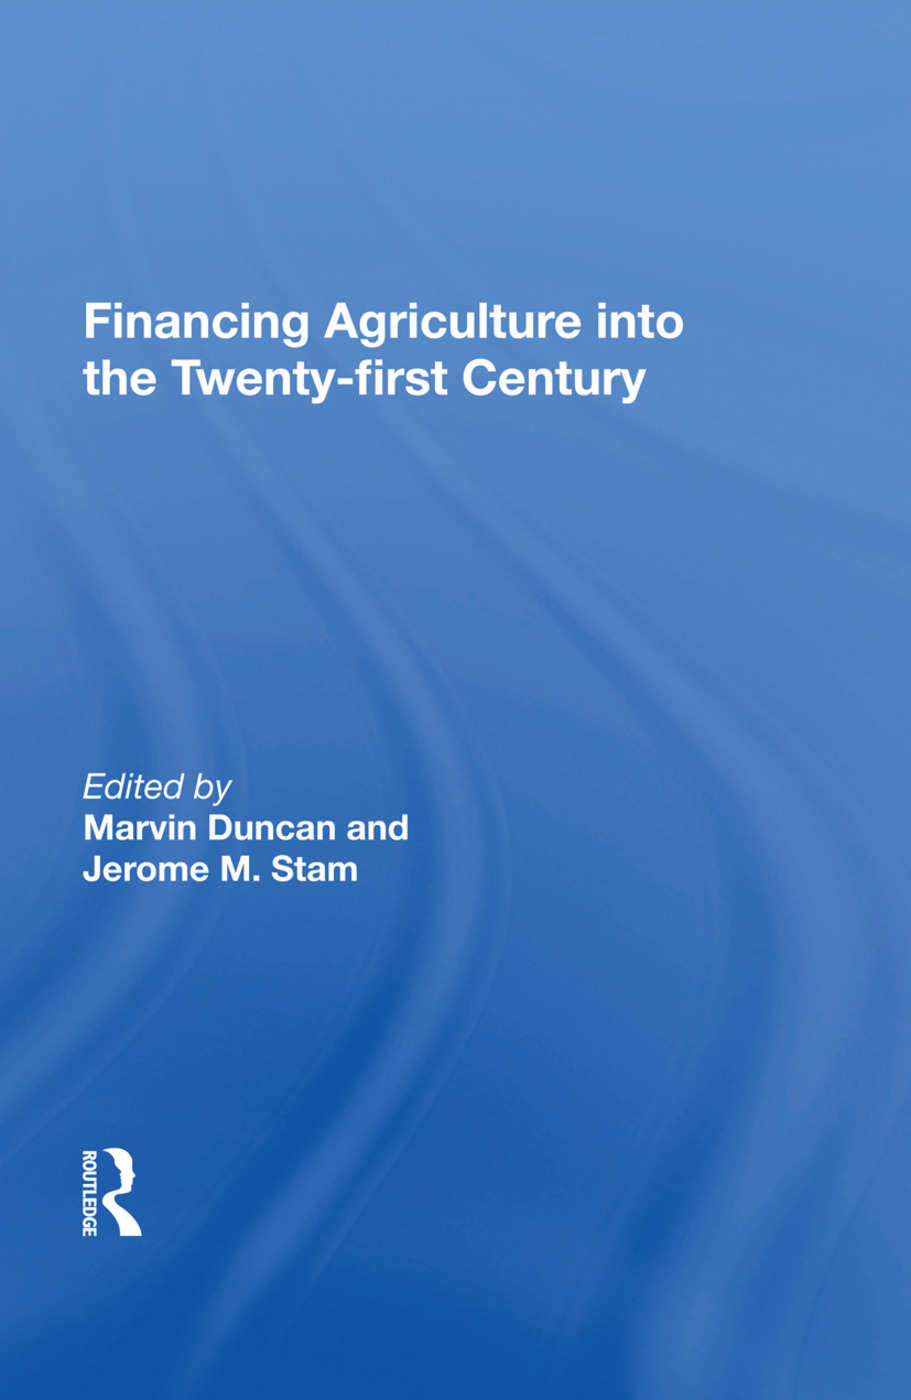 Financing Agriculture Into the Twenty-First Century